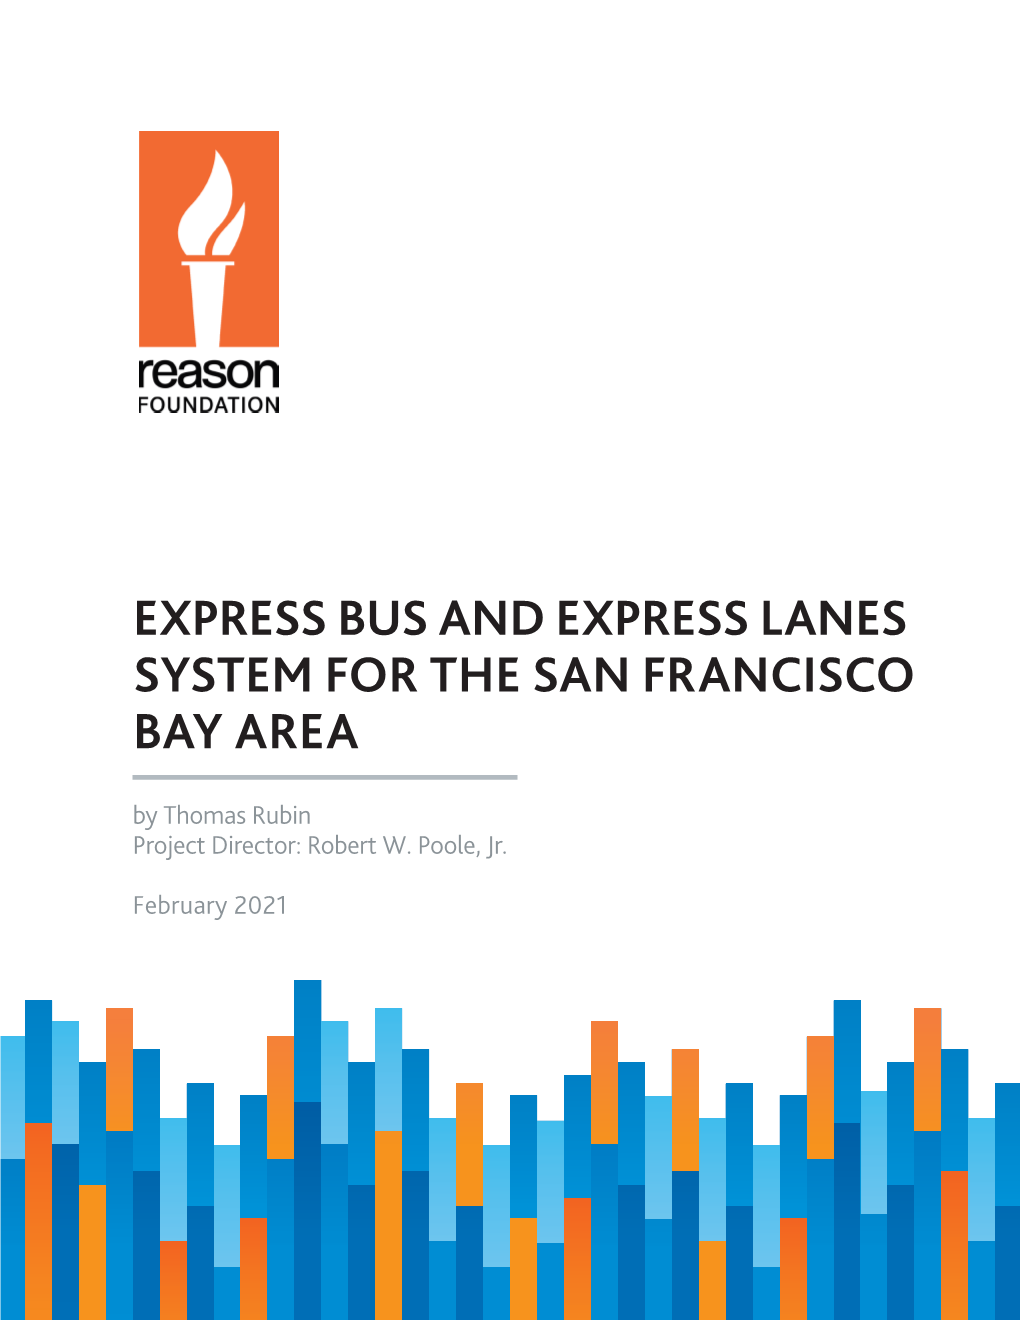 Express Bus and Express Lanes System in the San Francisco Bay Area